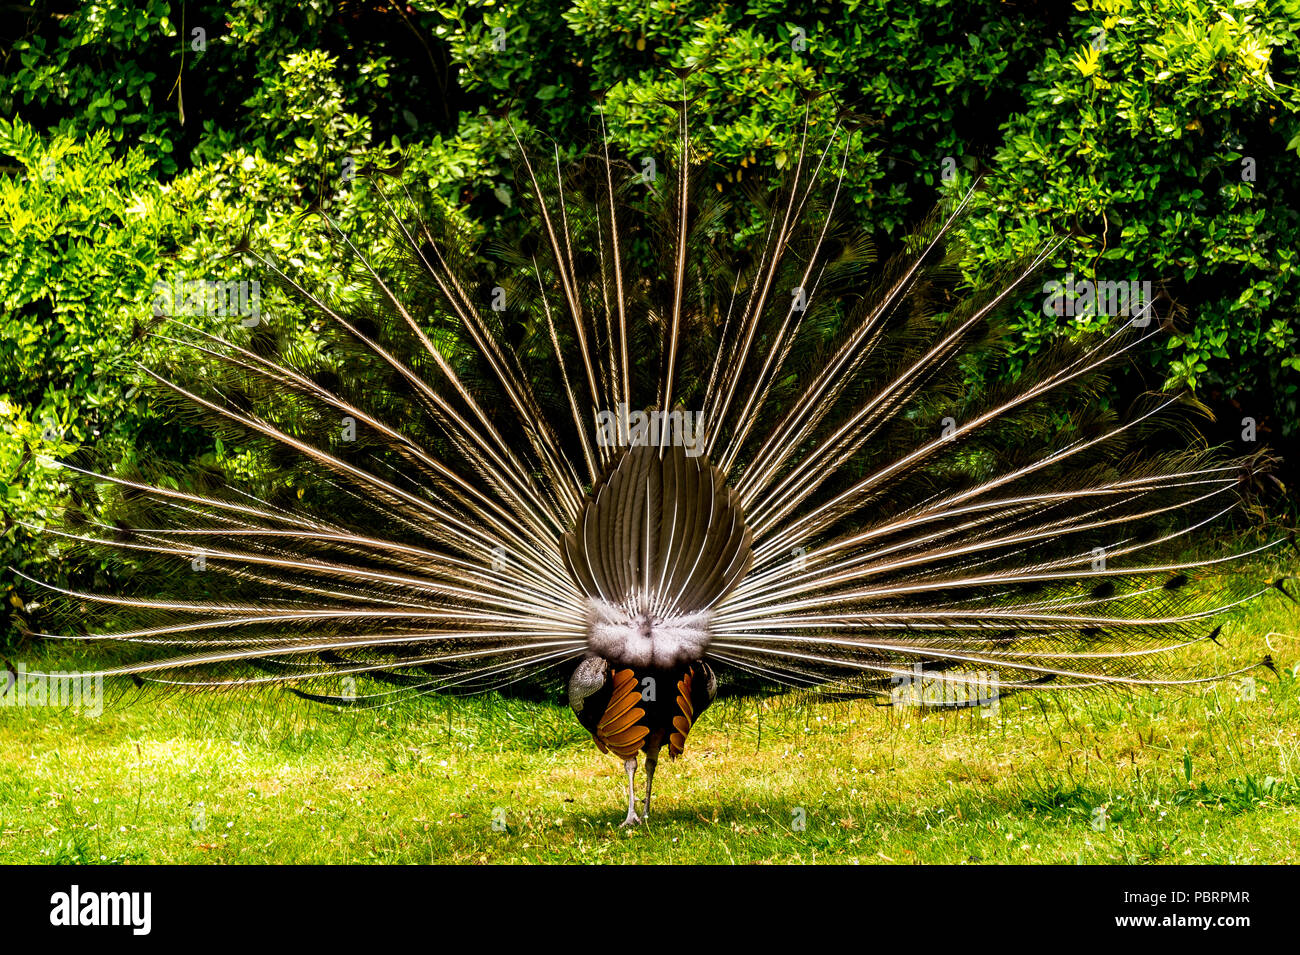 Peacock from behind with its plumage as he fans his tail in a park in Paris, France Stock Photo